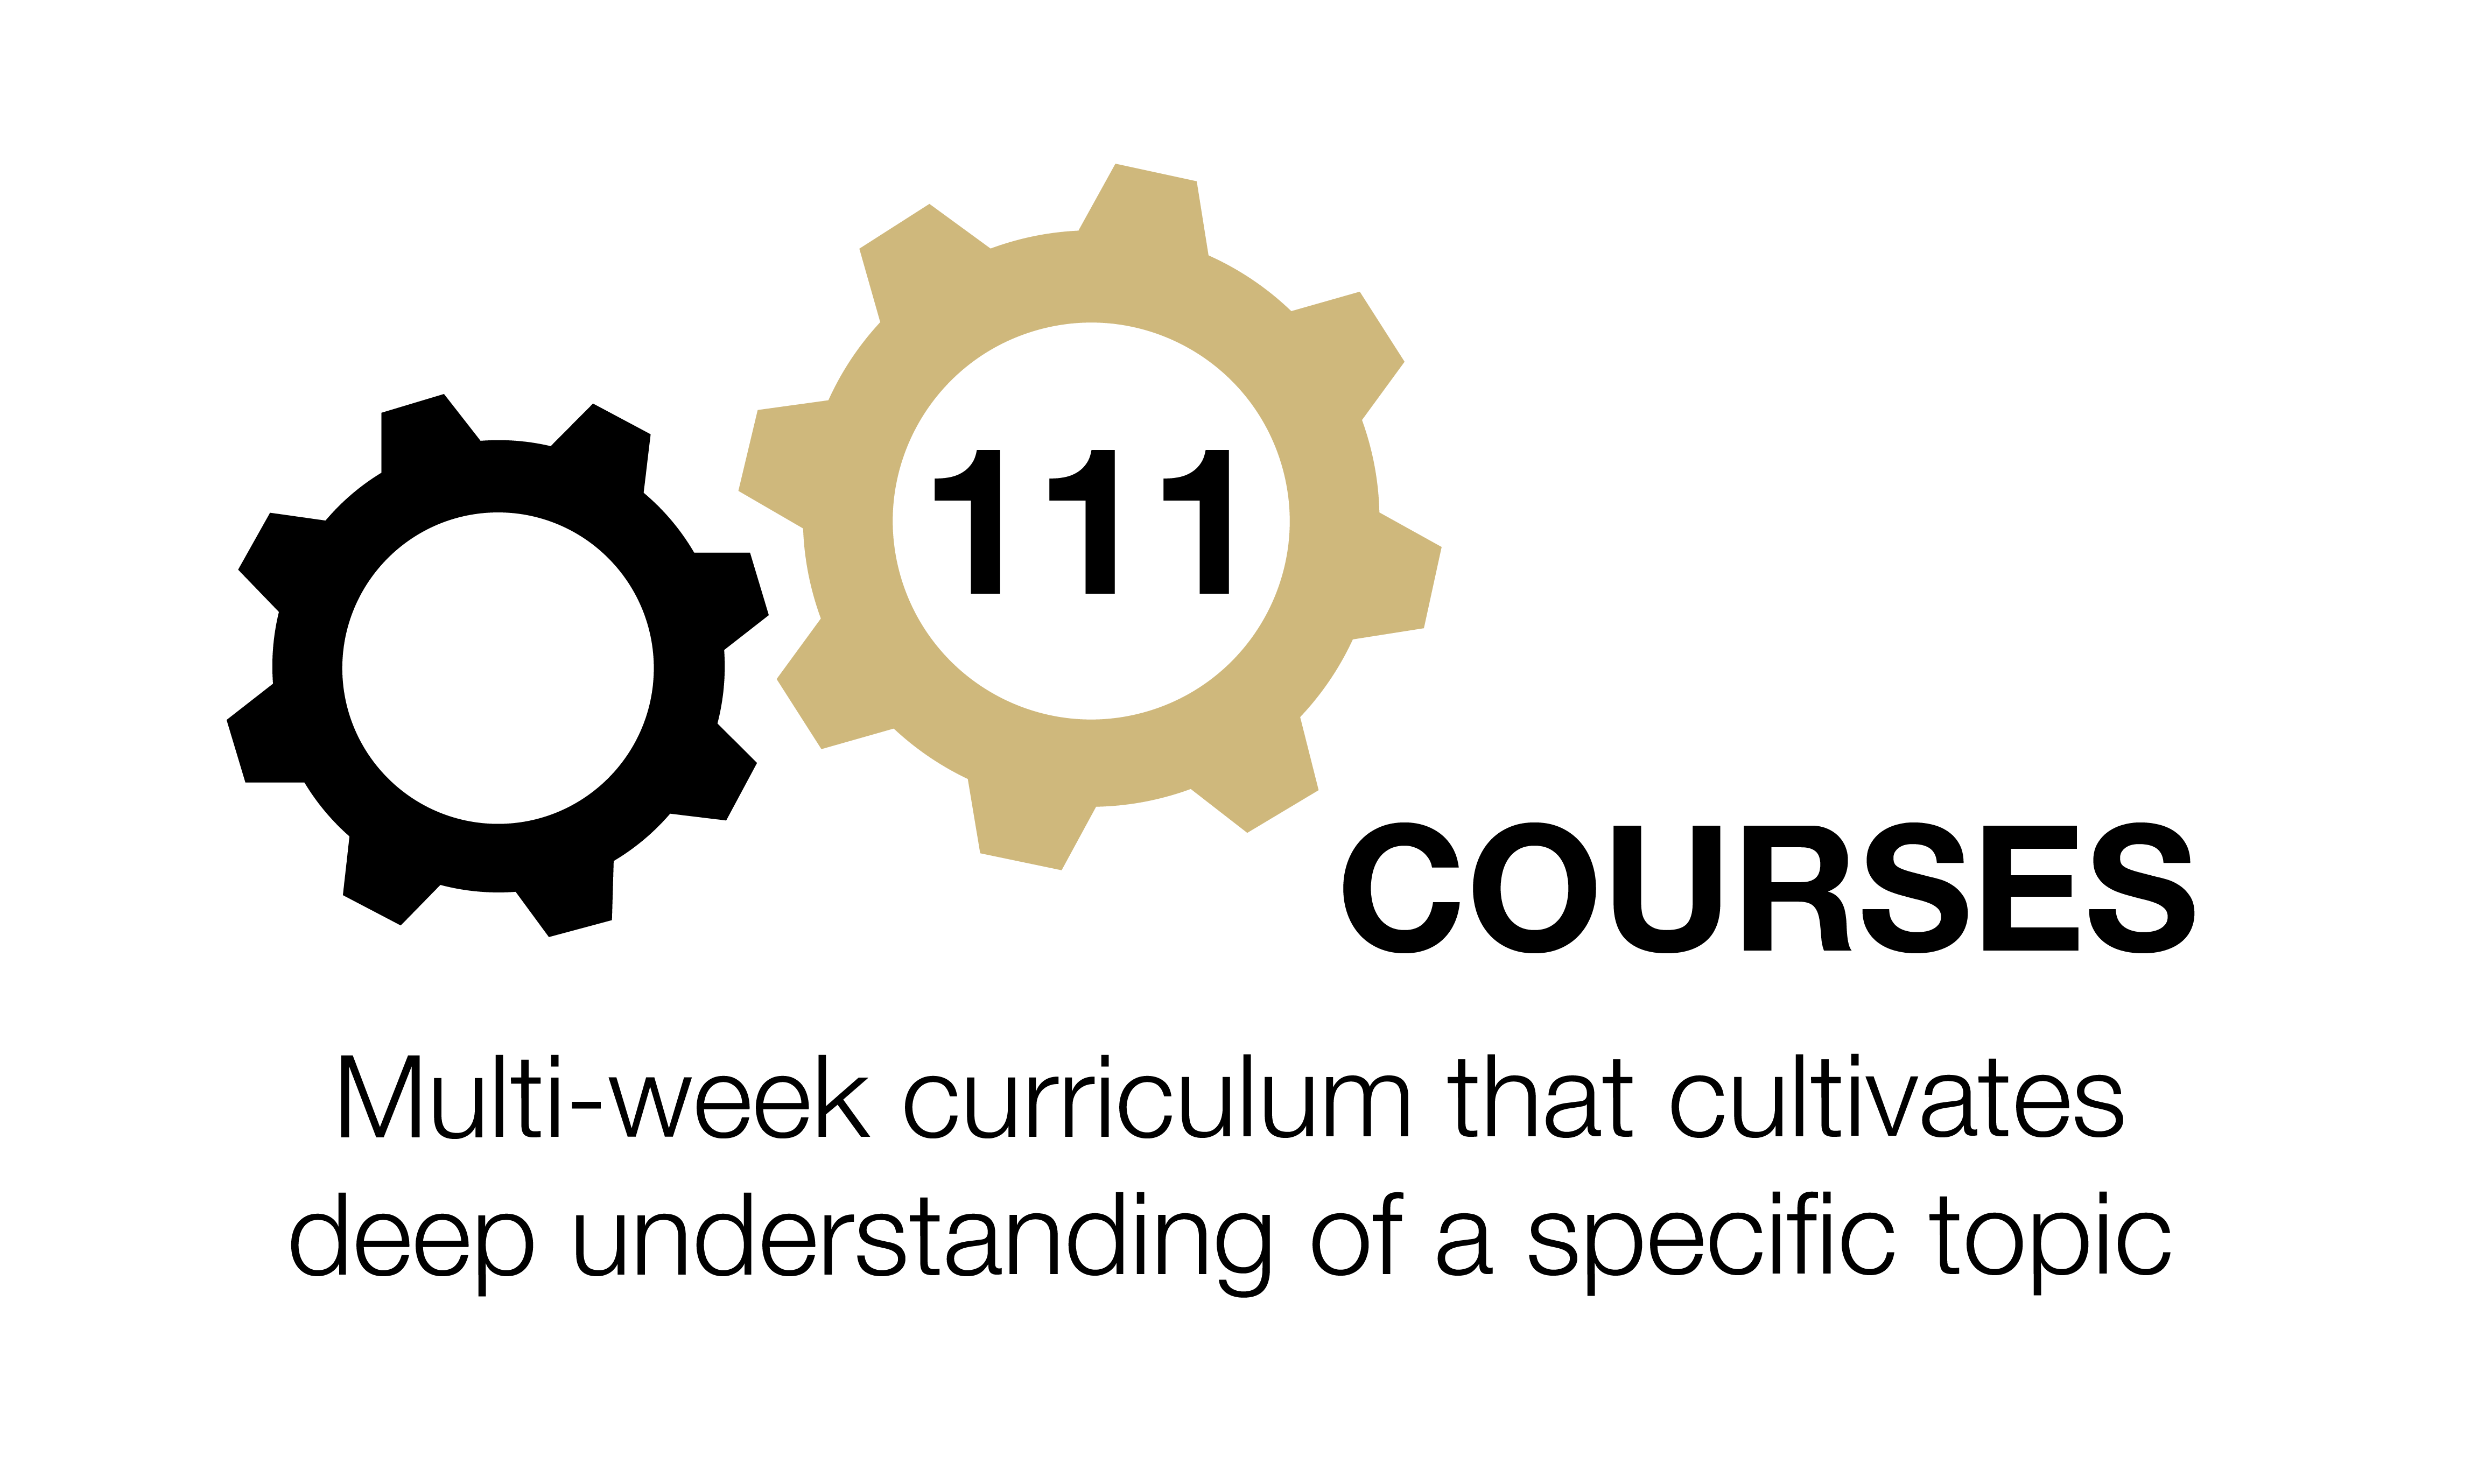 MOOCs has 111 courses. A course is a multi-week curriculum that cultivates deep understanding of a specific topic.